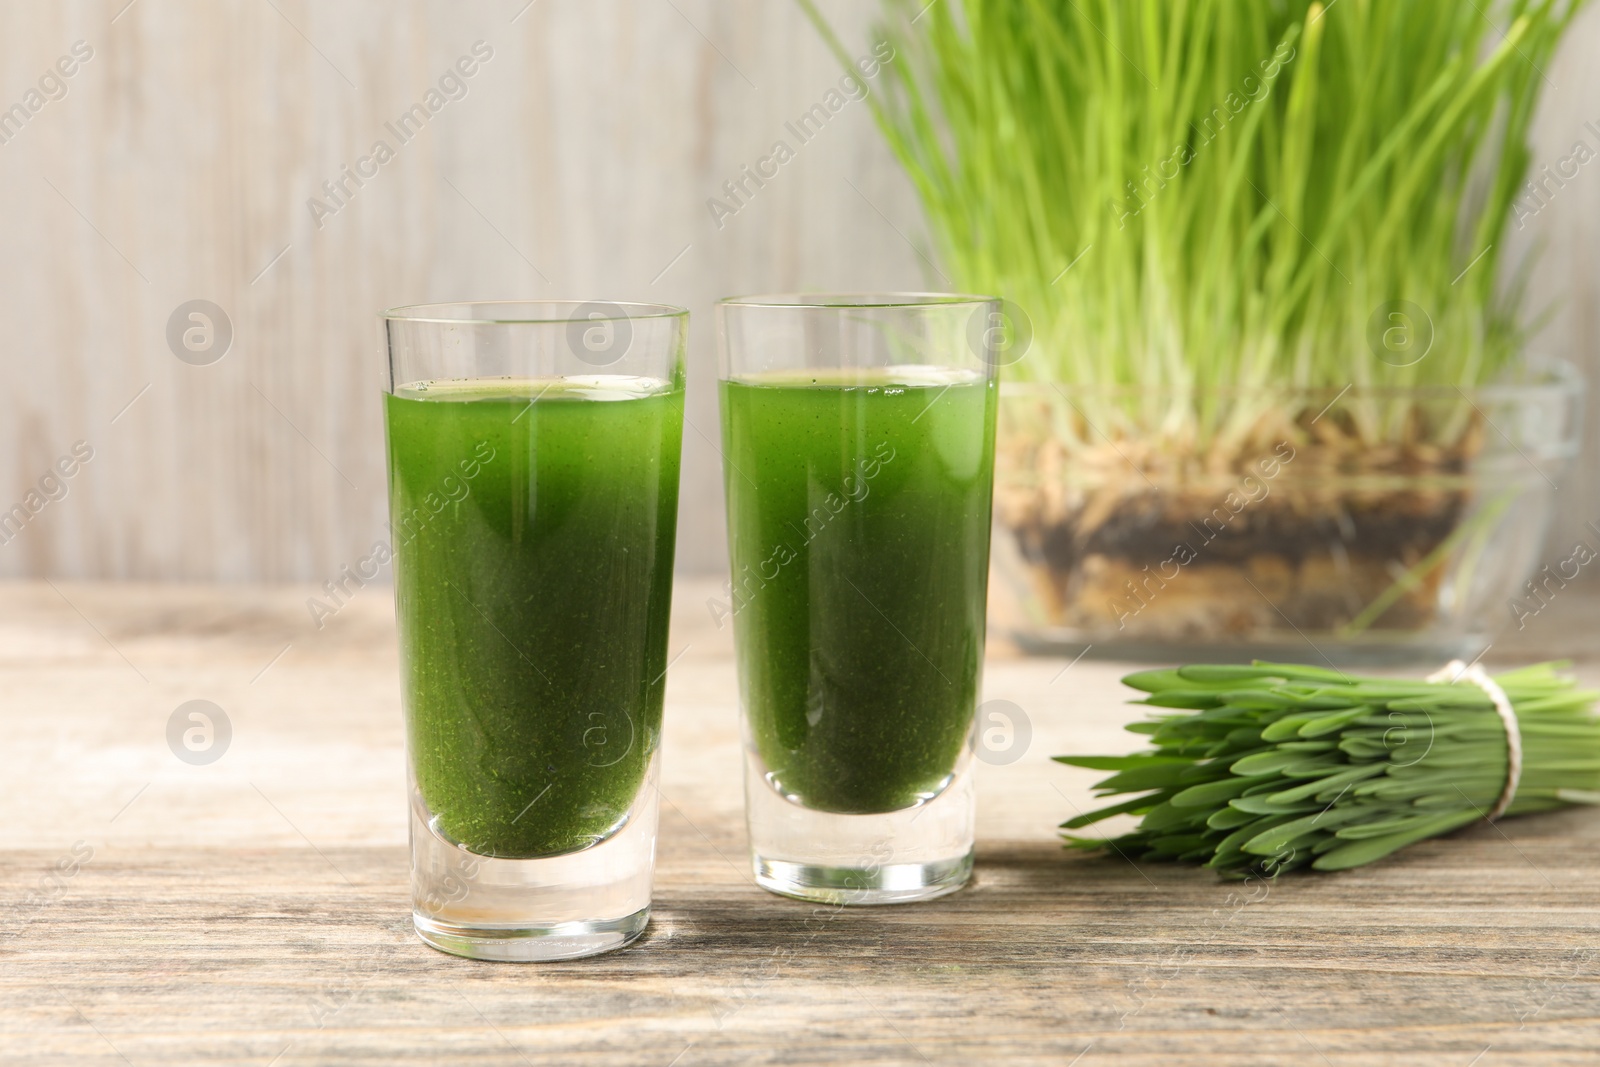 Photo of Wheat grass drink in shot glasses and fresh green sprouts on wooden table, closeup